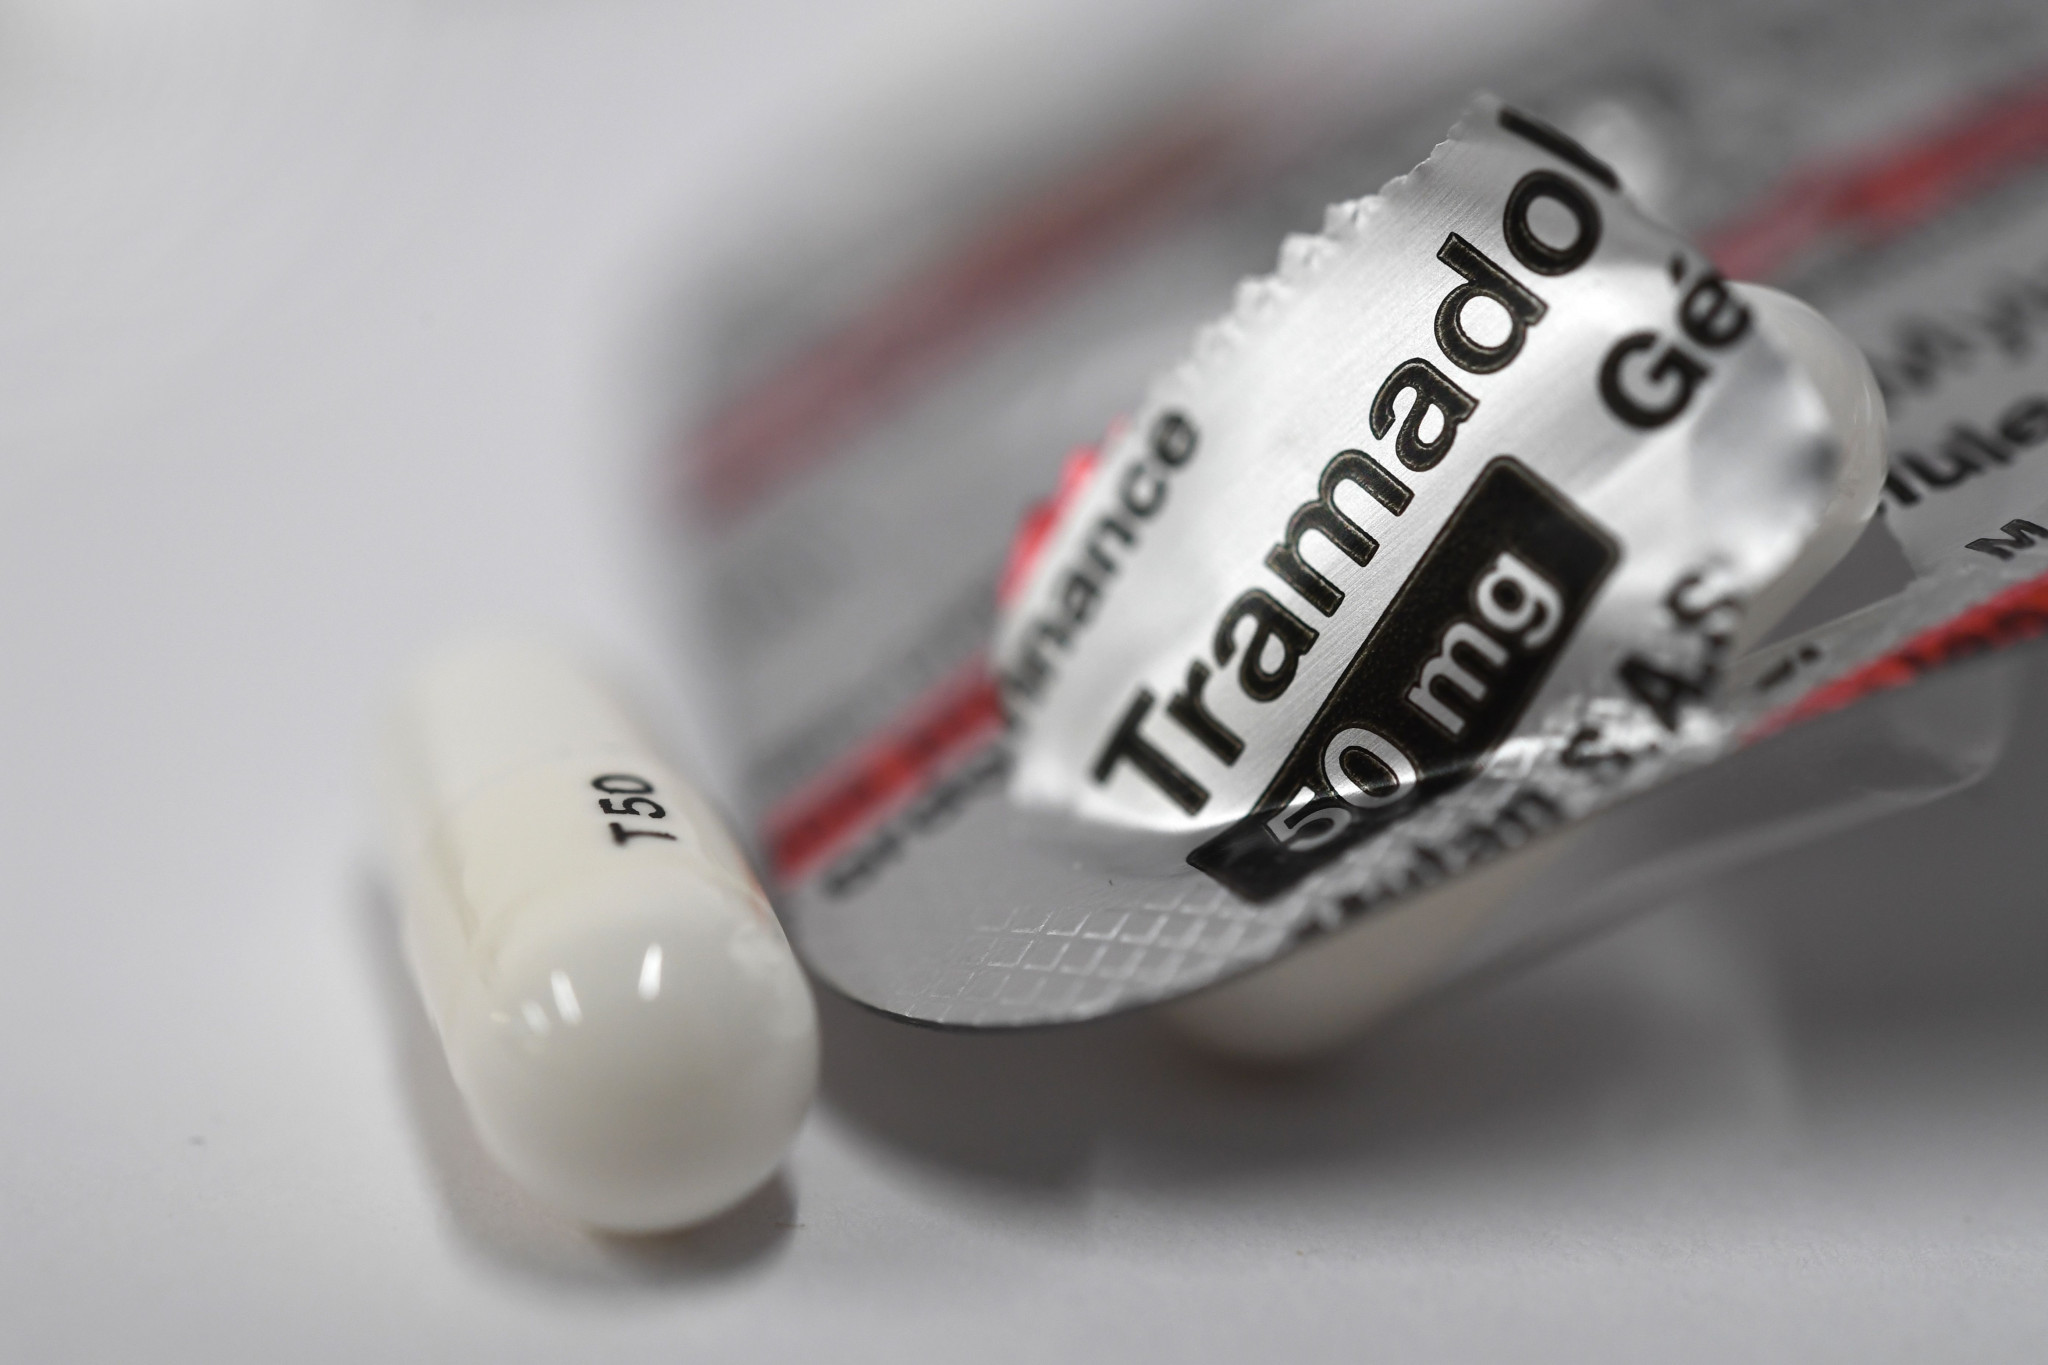 Tramadol will be banned across sport from 2024  ©Getty Images